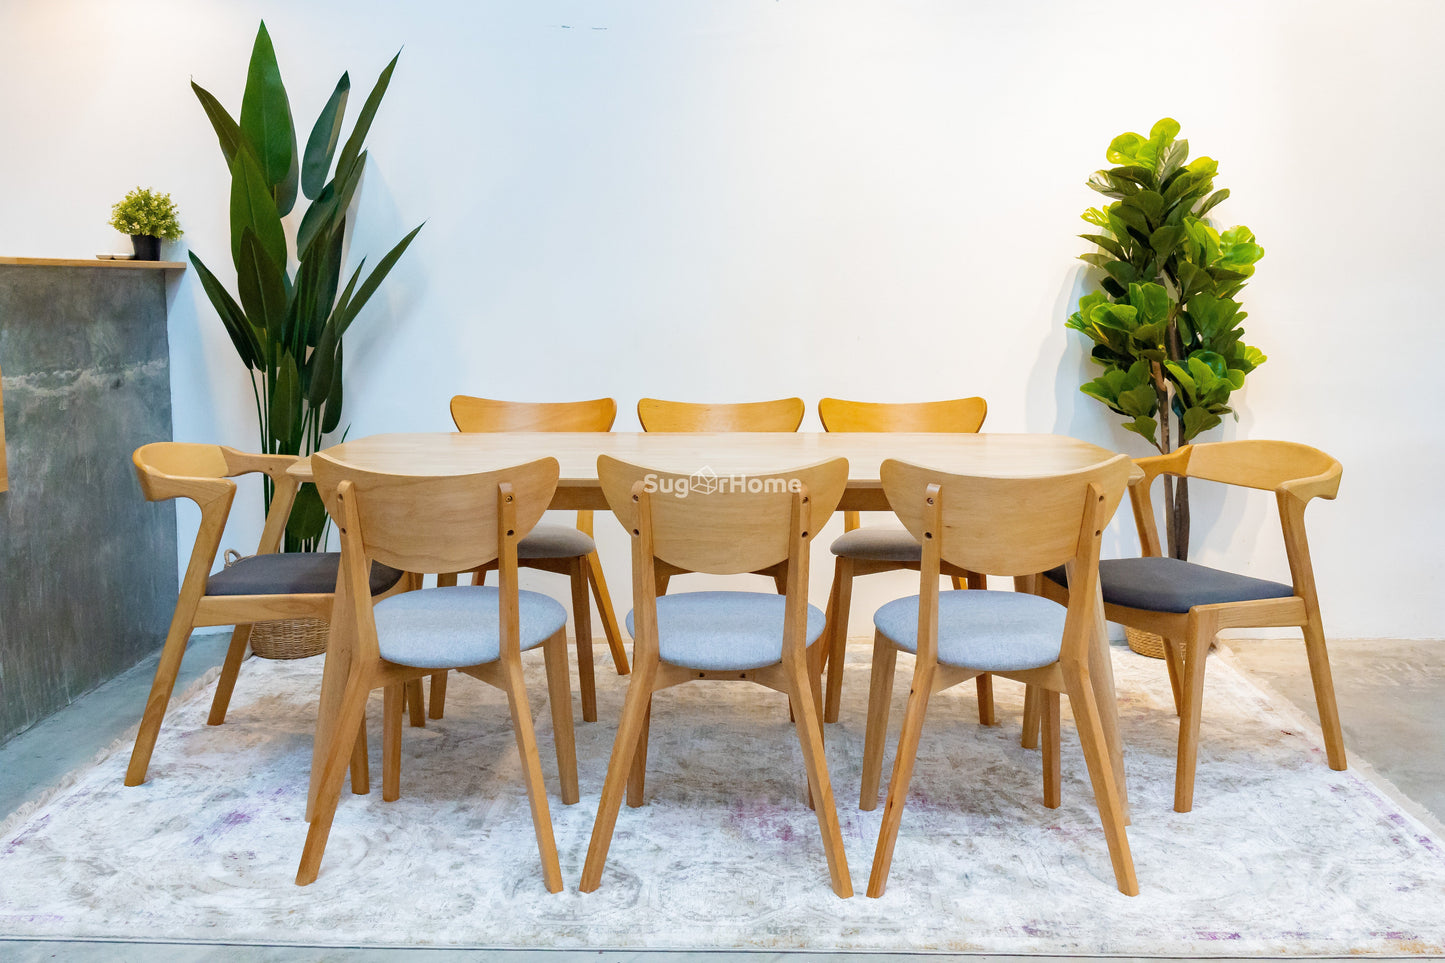 Chestnut 1.8m Dining Table in Natural with 6 Hazel Chairs in Natural + 2 Zara Chairs